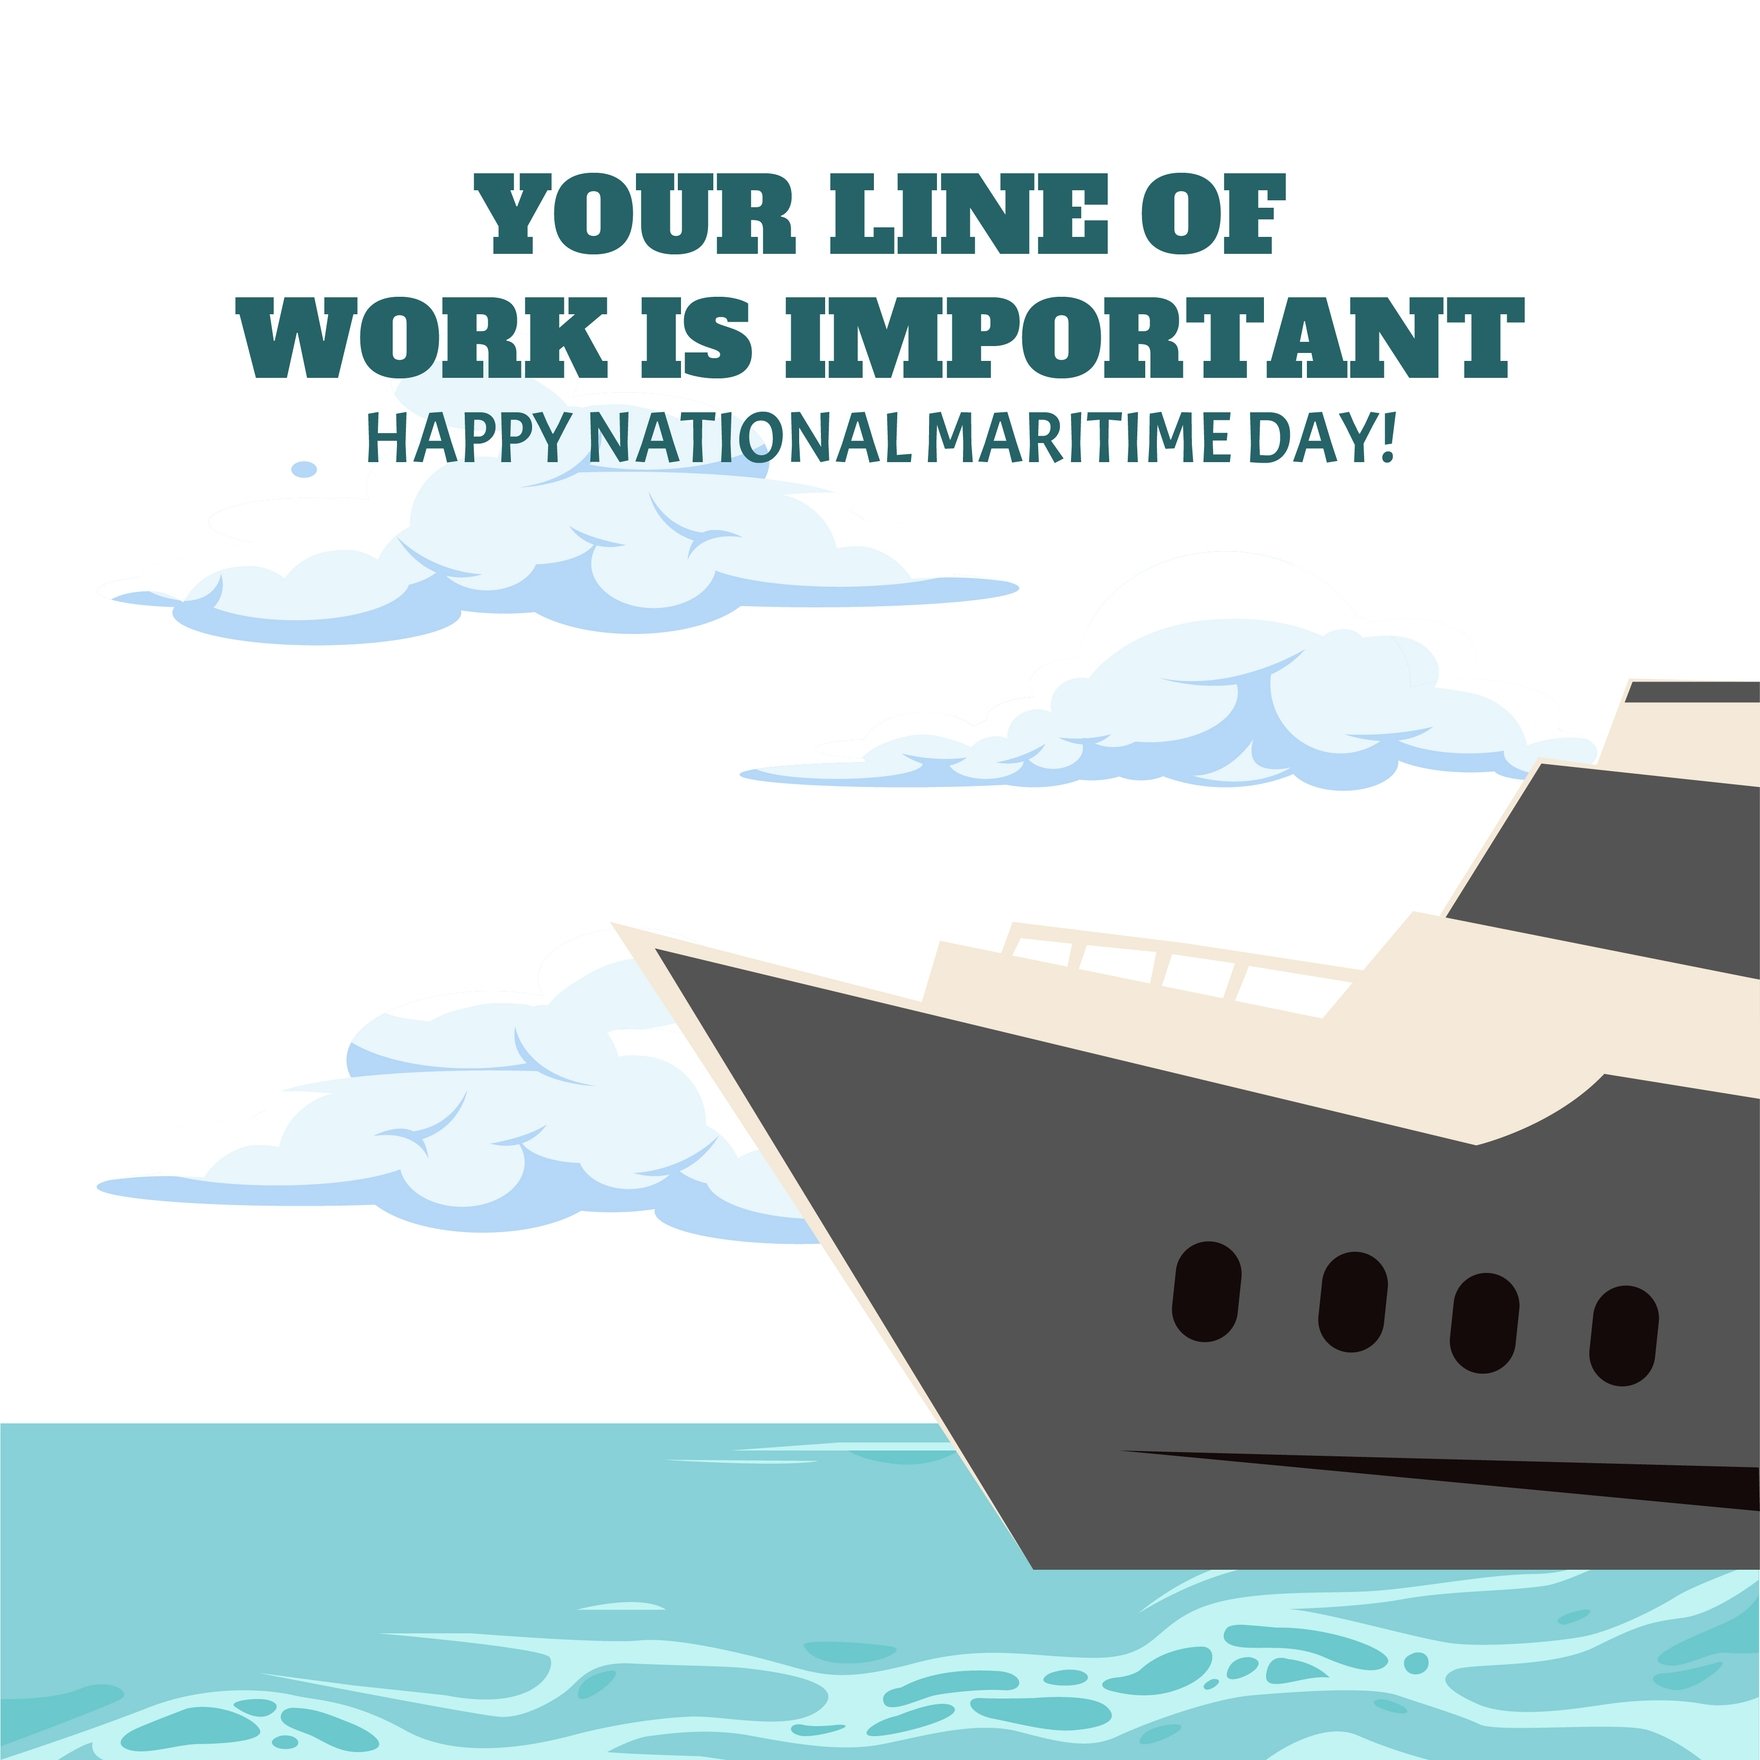 National Maritime Day Greeting Card Vector in Illustrator, PSD, EPS, SVG, JPG, PNG